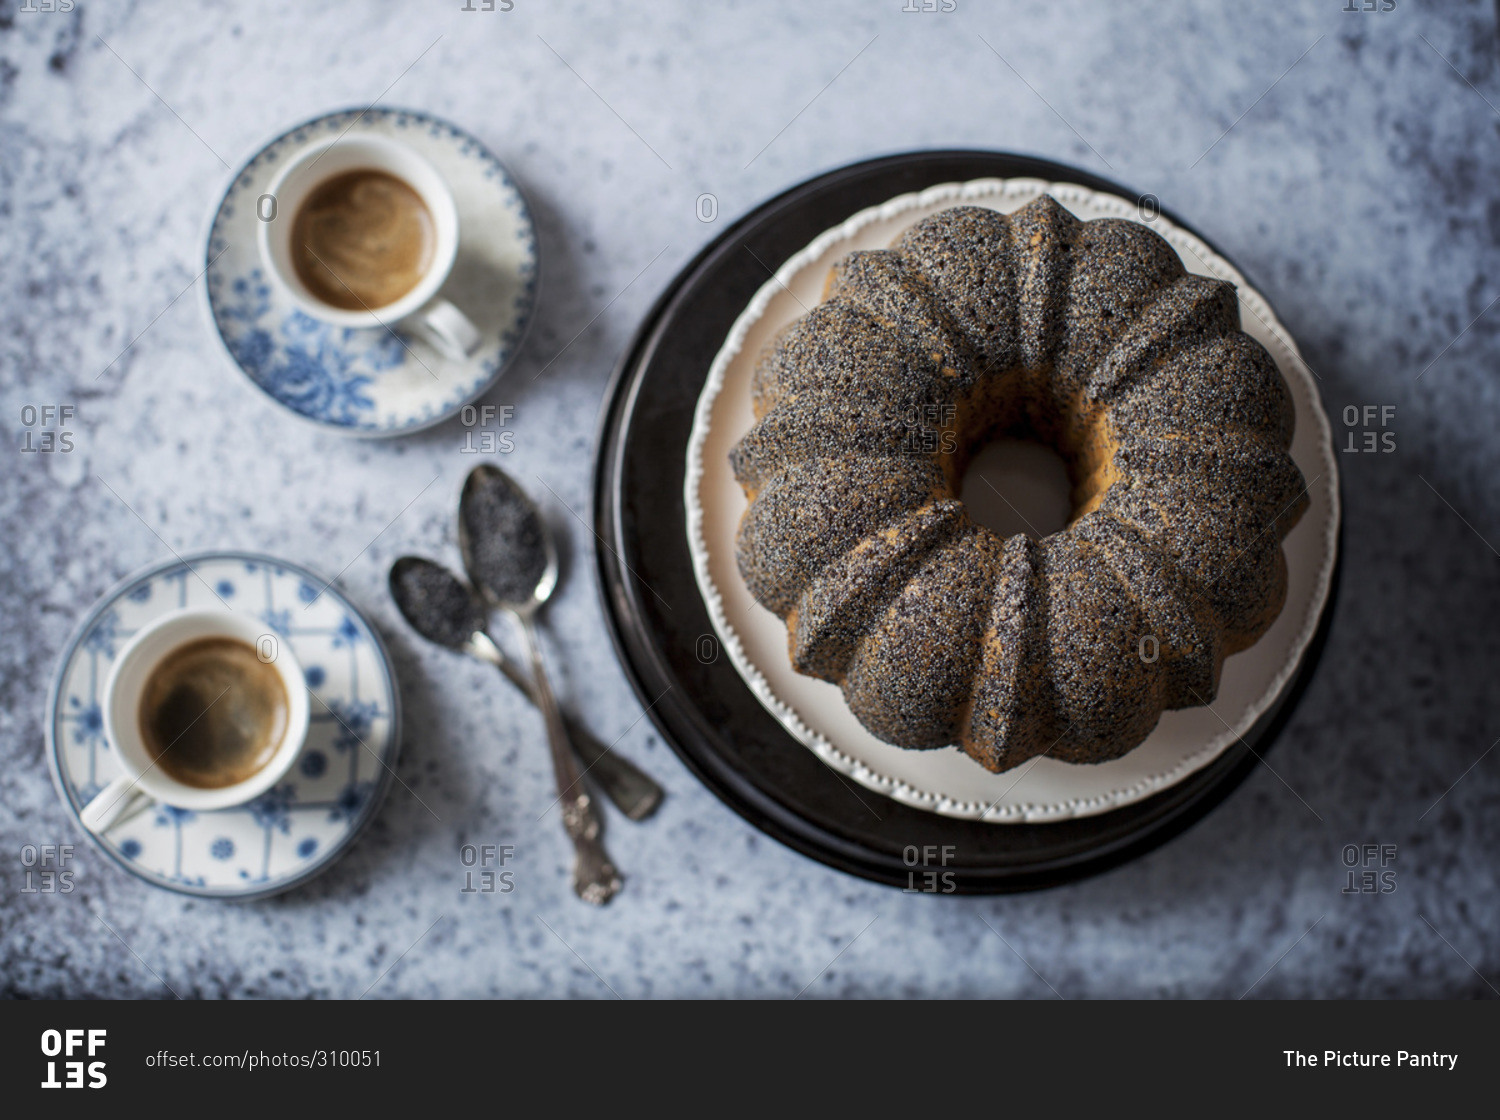 Lime poppy seed cake served for a coffee break